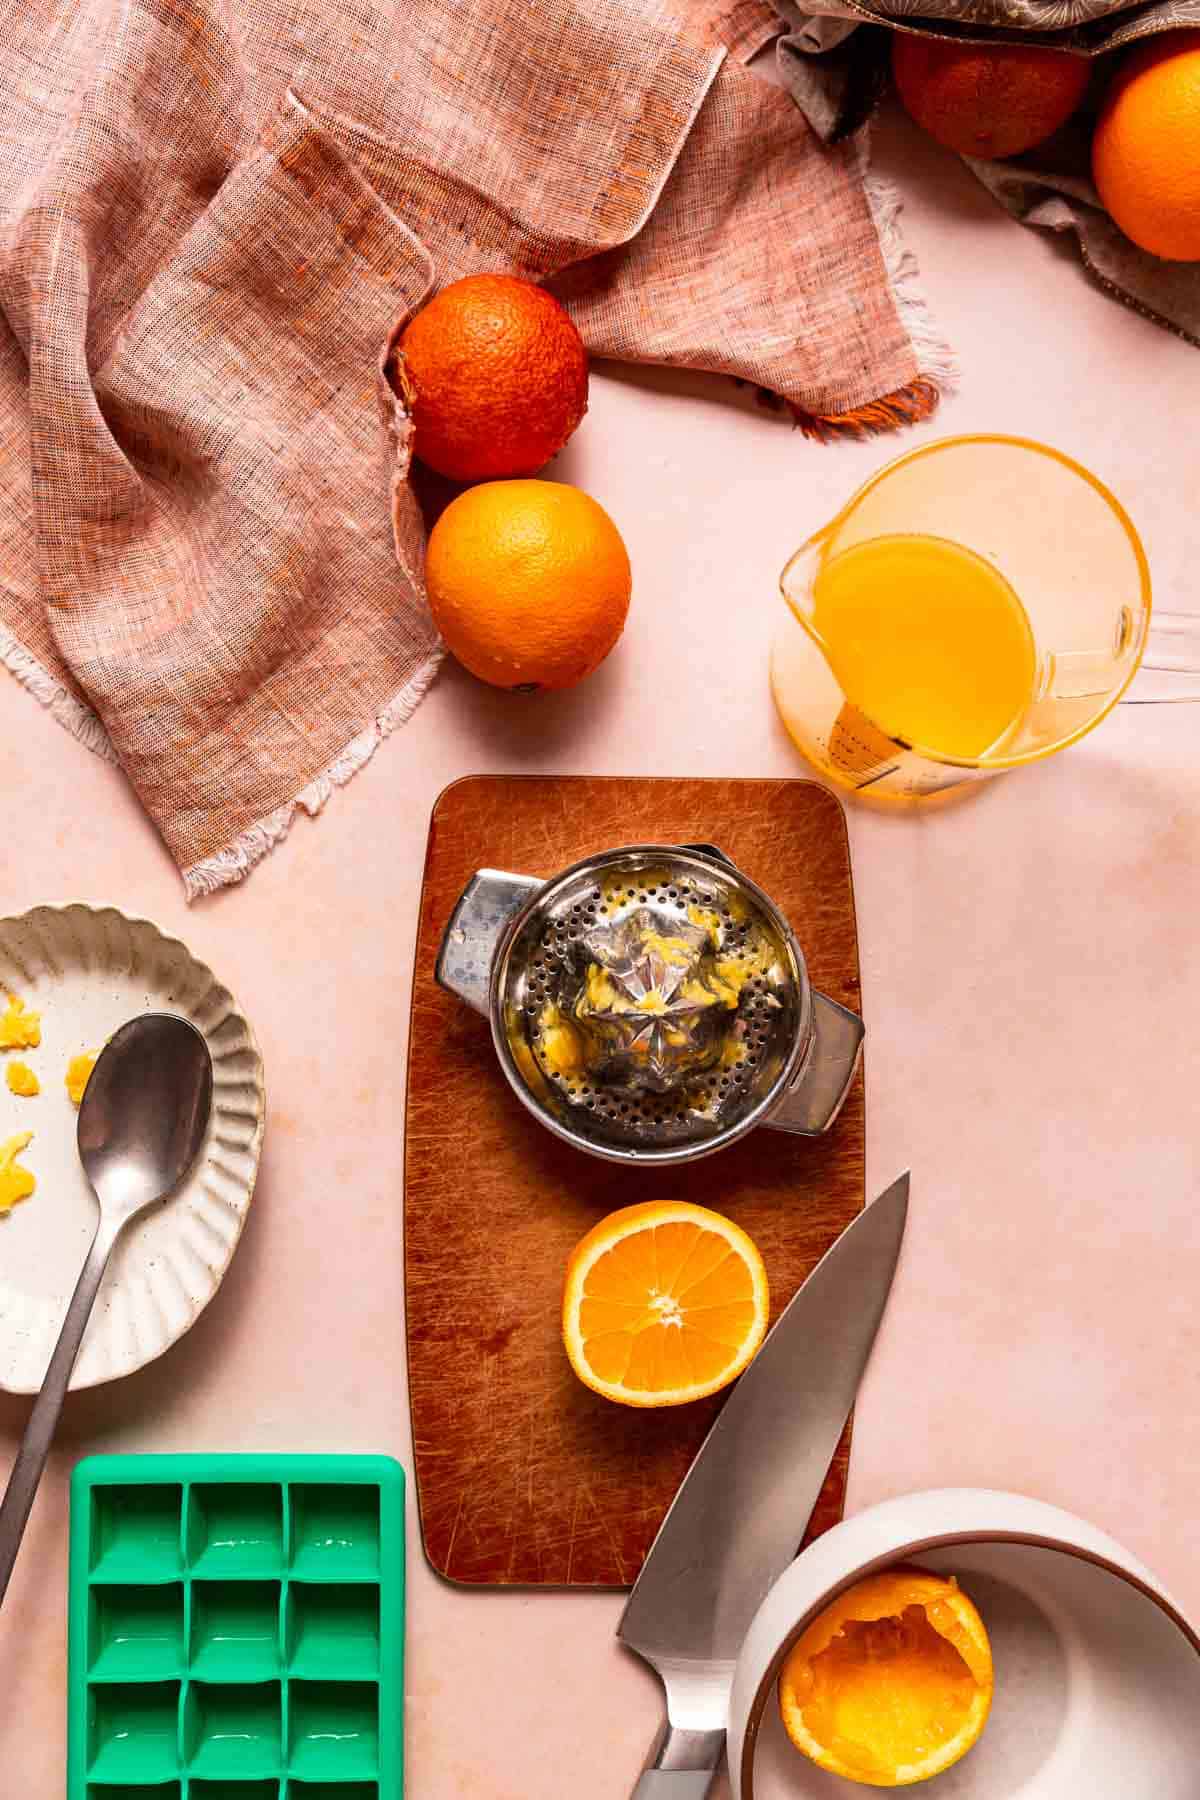 A stainless steel juice reamer next to a sliced orange, a blood orange and orange. and a measuring cup filled part way with fresh squeezed orange juice.